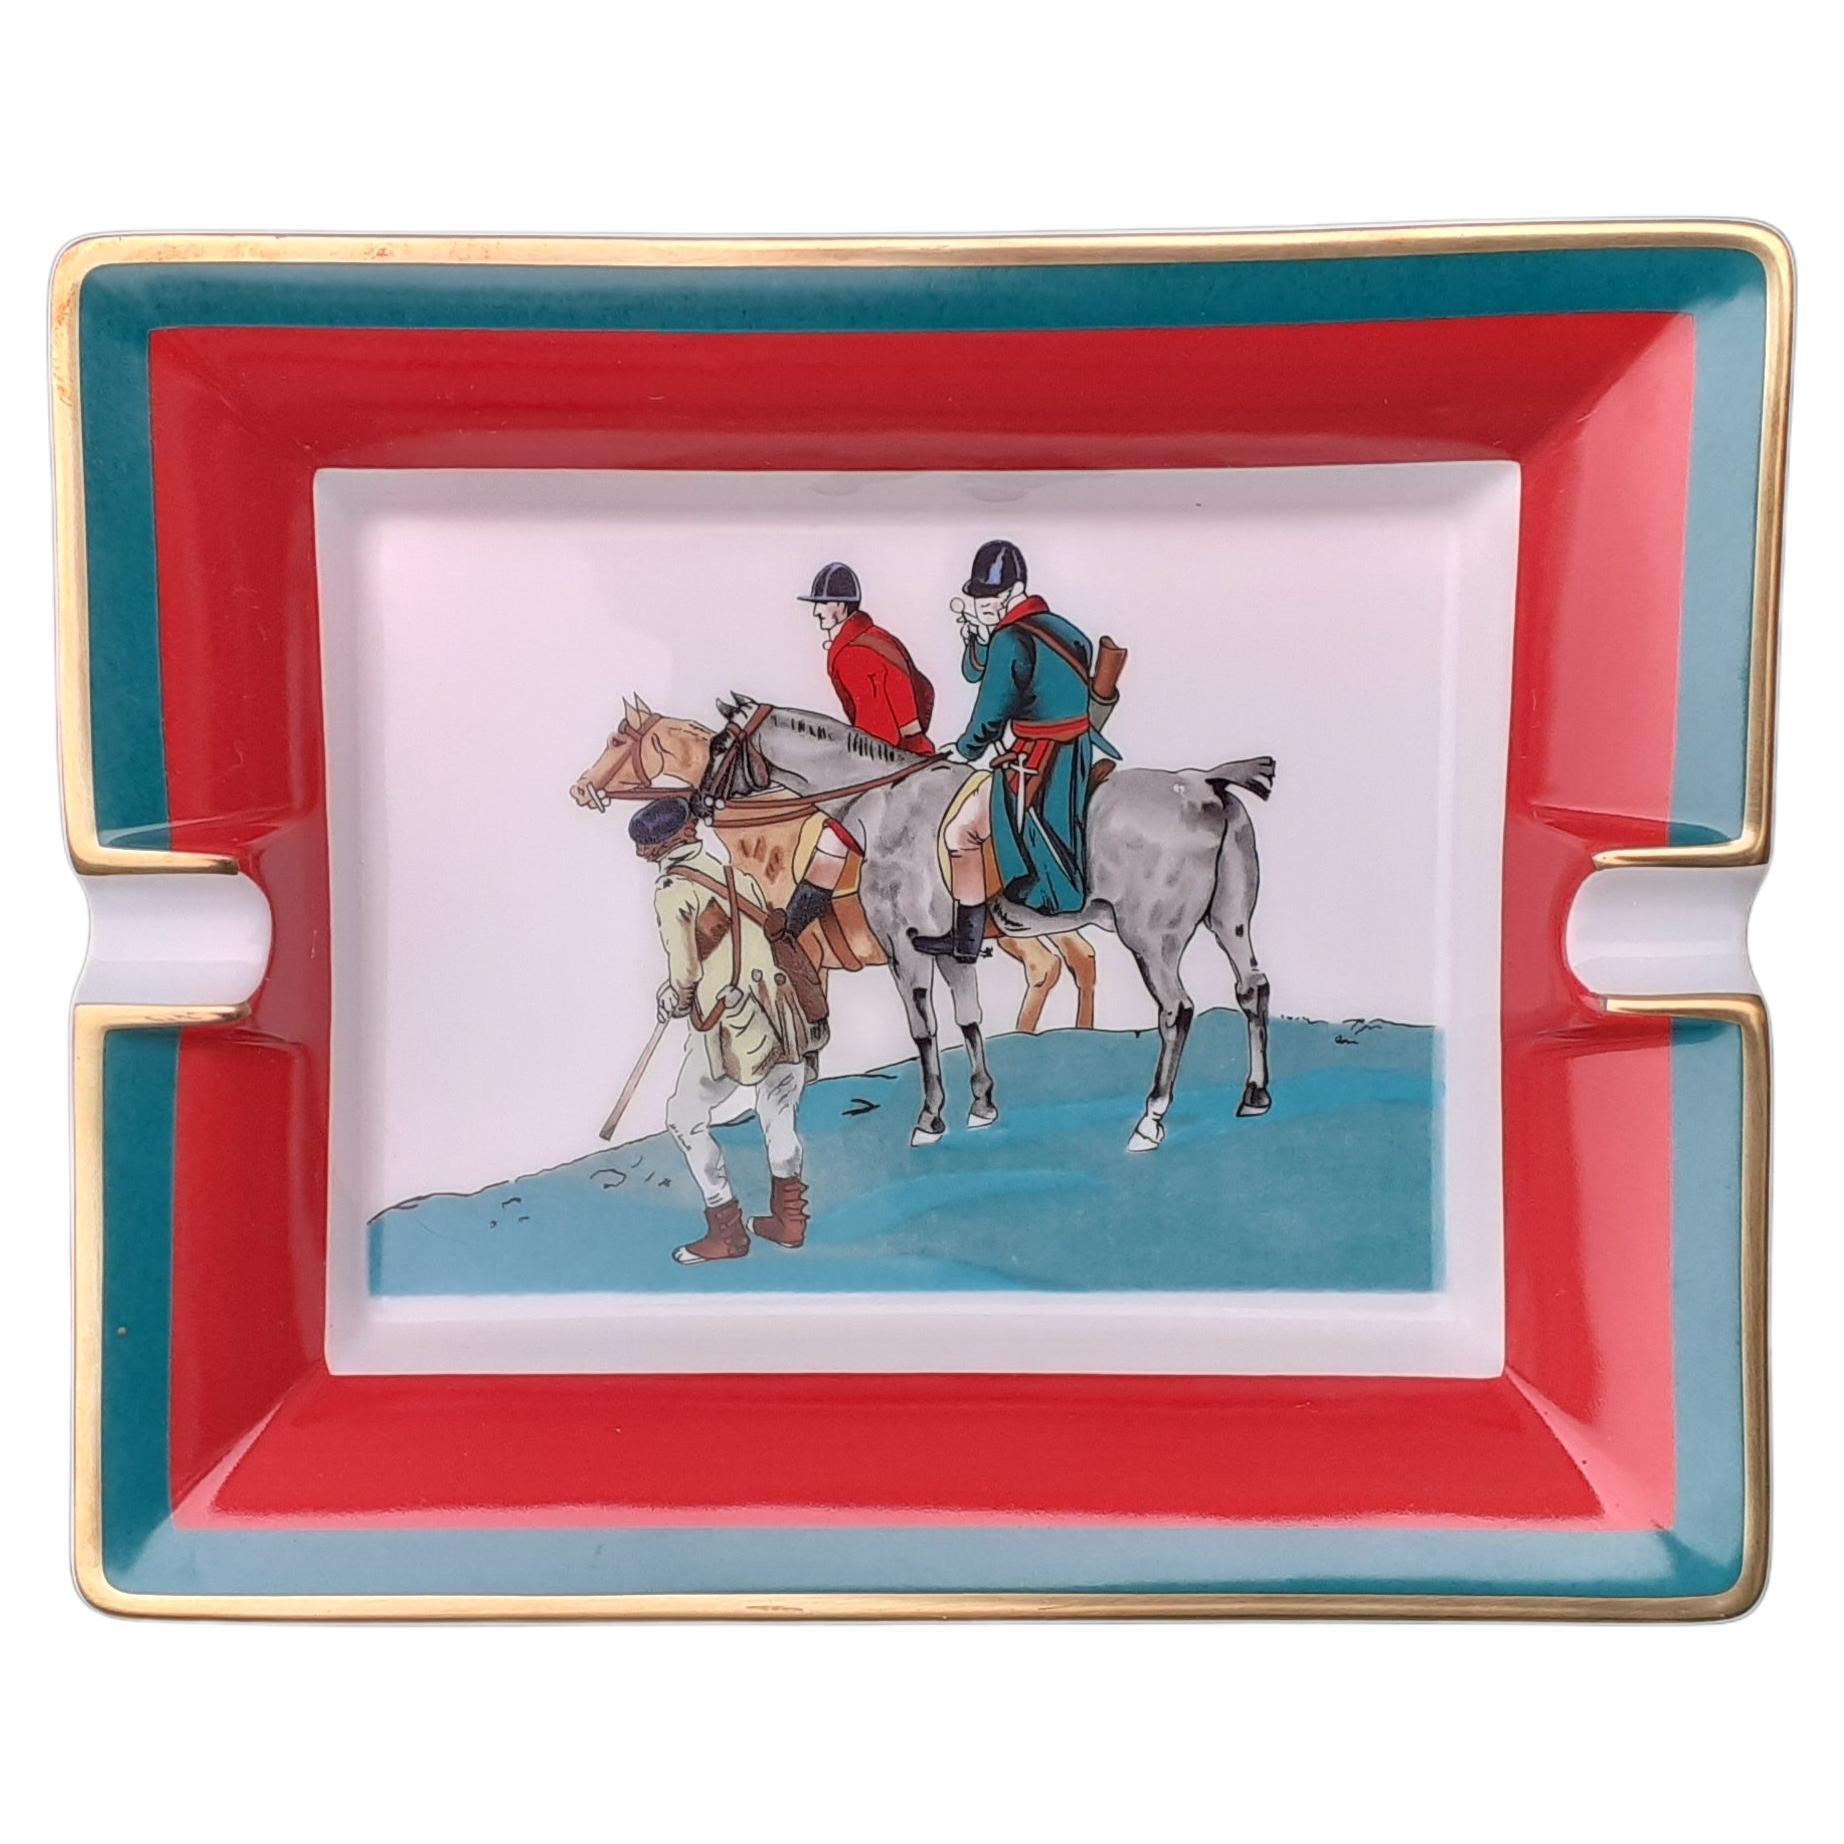 Hermès Vintage Cigar Ashtray Change Tray Hunting With Hounds in Porcelain